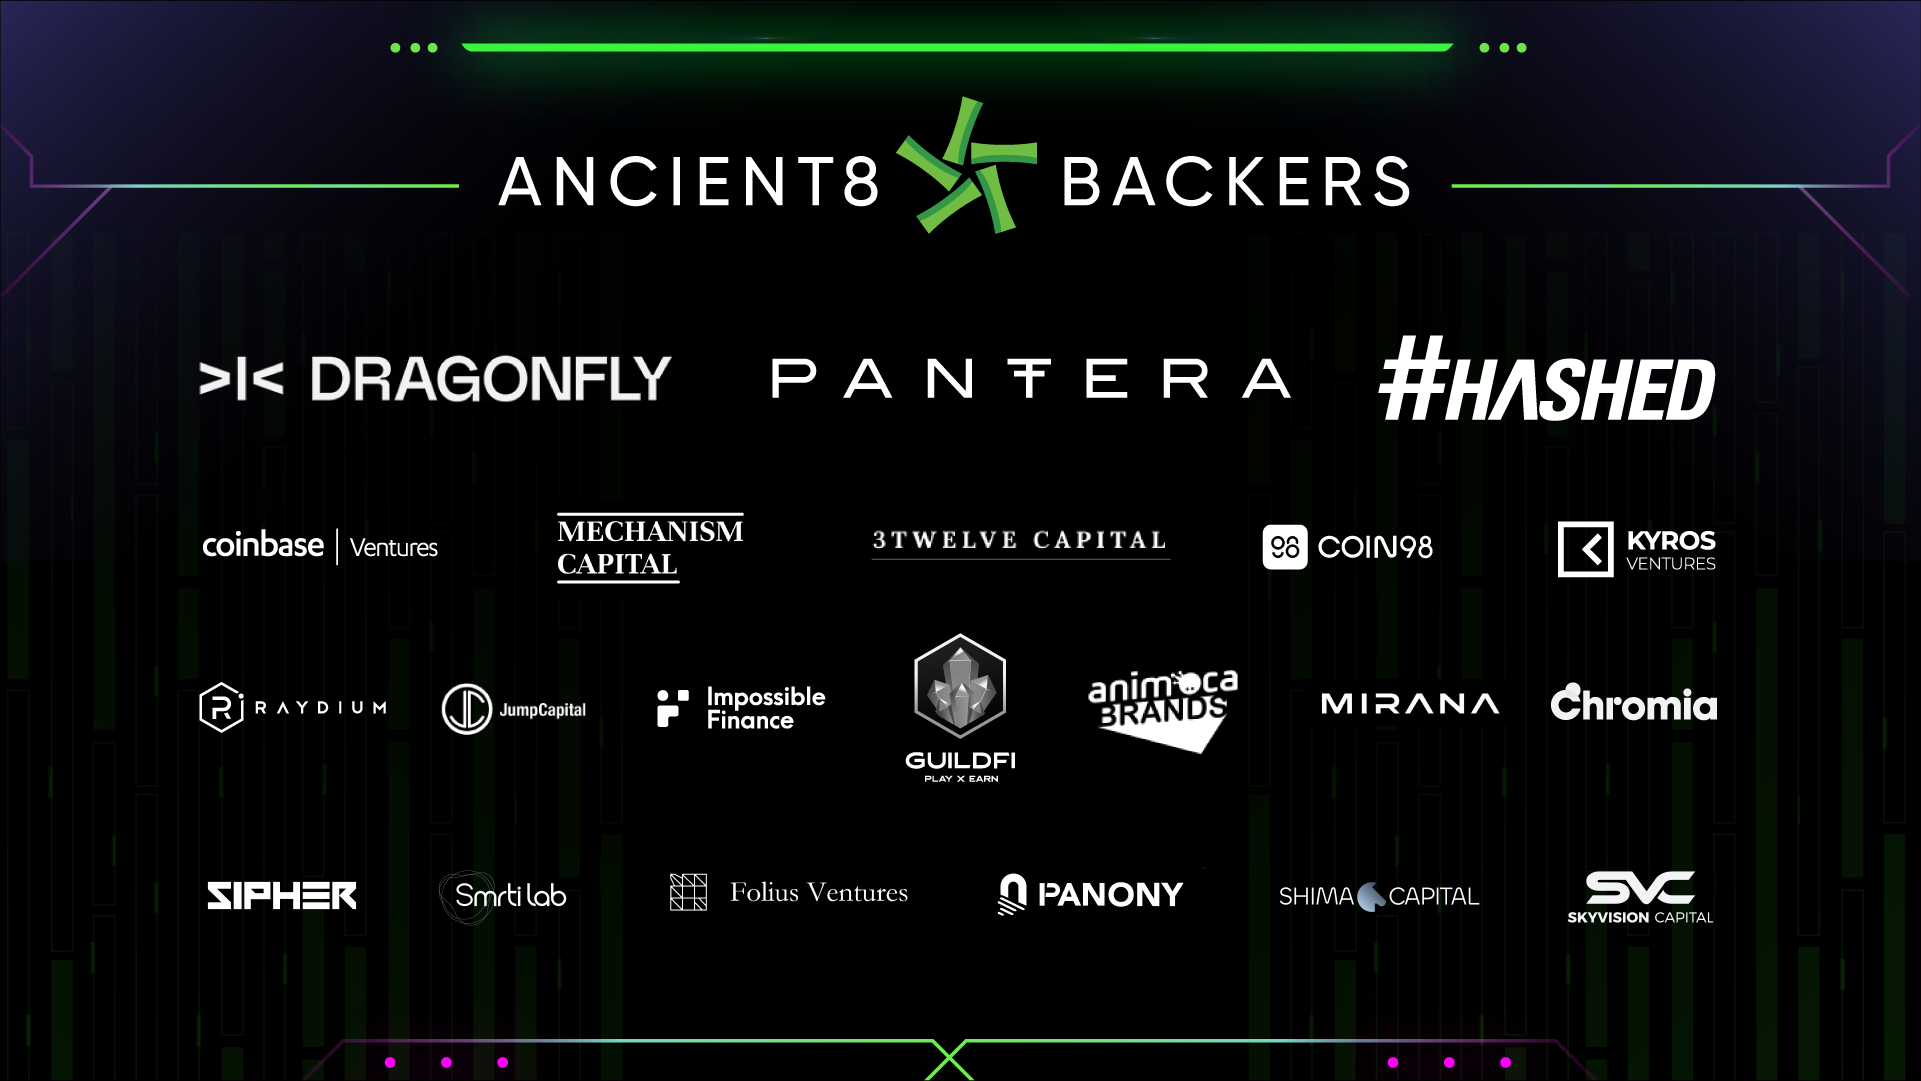 Ancient8 Raises $4 Million in Seed Funding